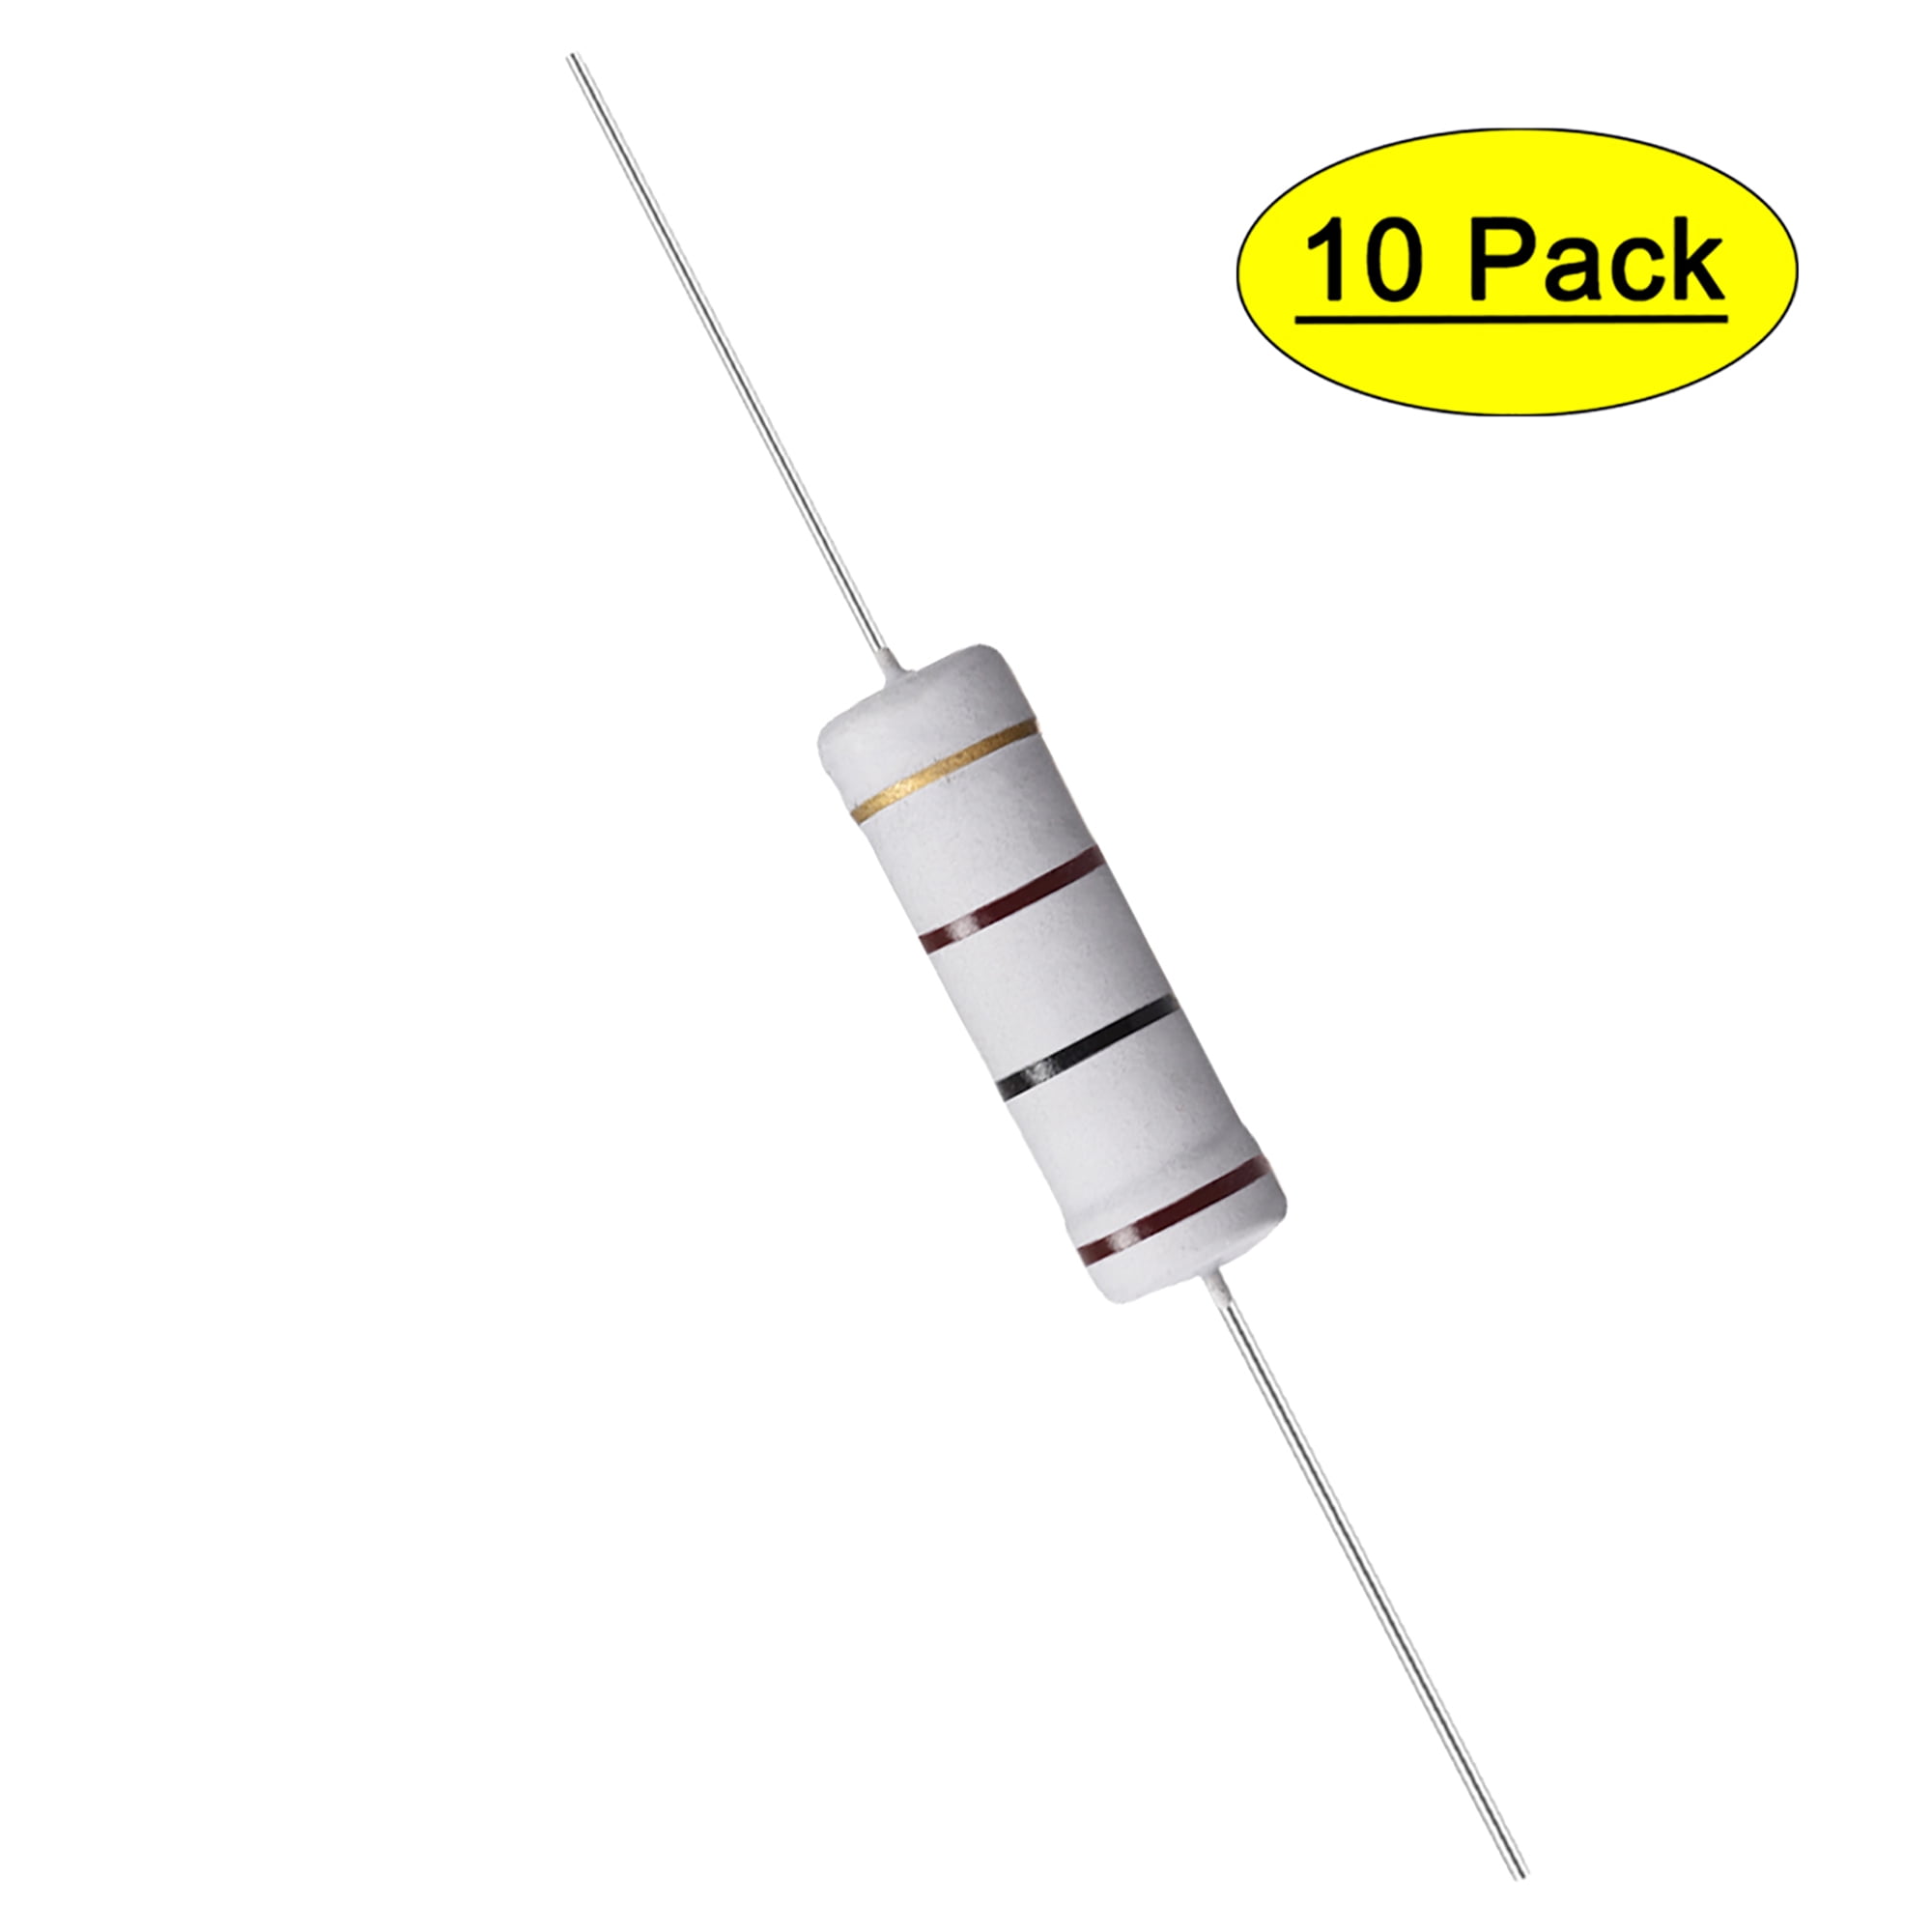 uxcell 50Pcs 100 Ohm Resistor 5W 5% Tolerance Metal Oxide Film Resistors Flame Proof for DIY Electronic Projects and Experiments Axial Lead 